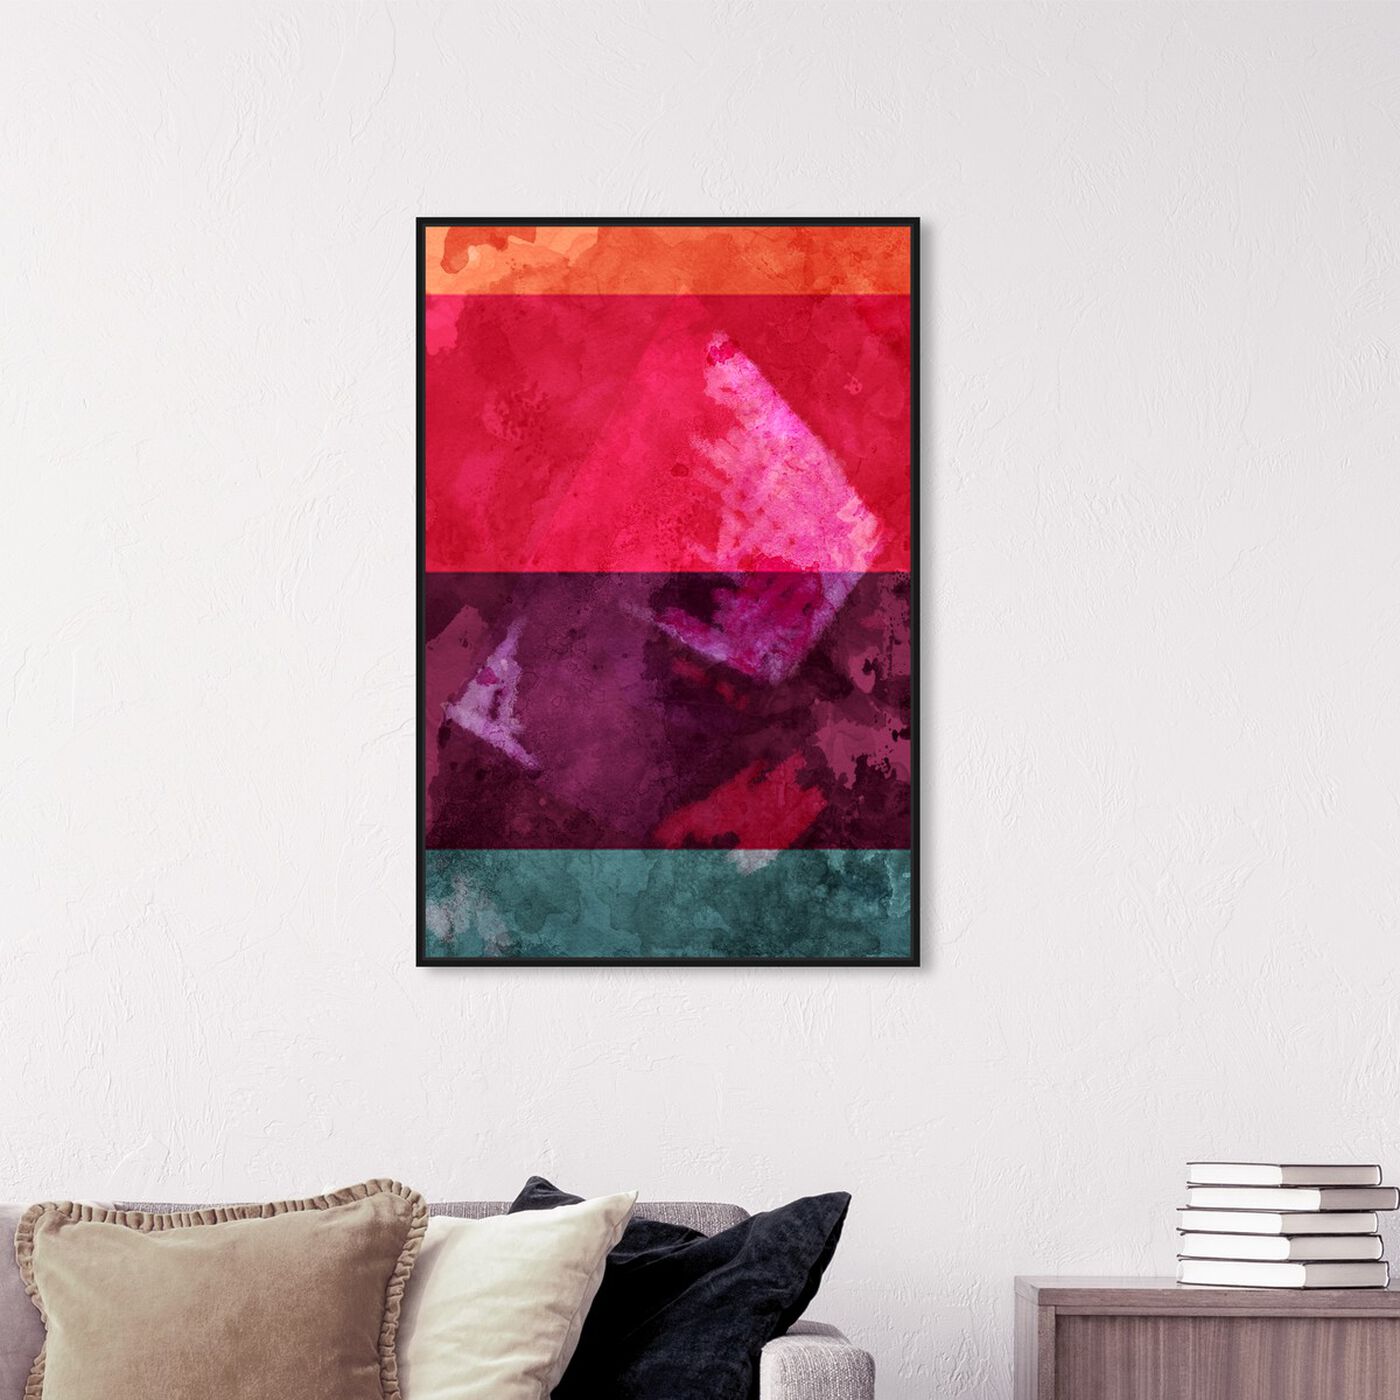 Hanging view of You Make Me featuring abstract and paint art.